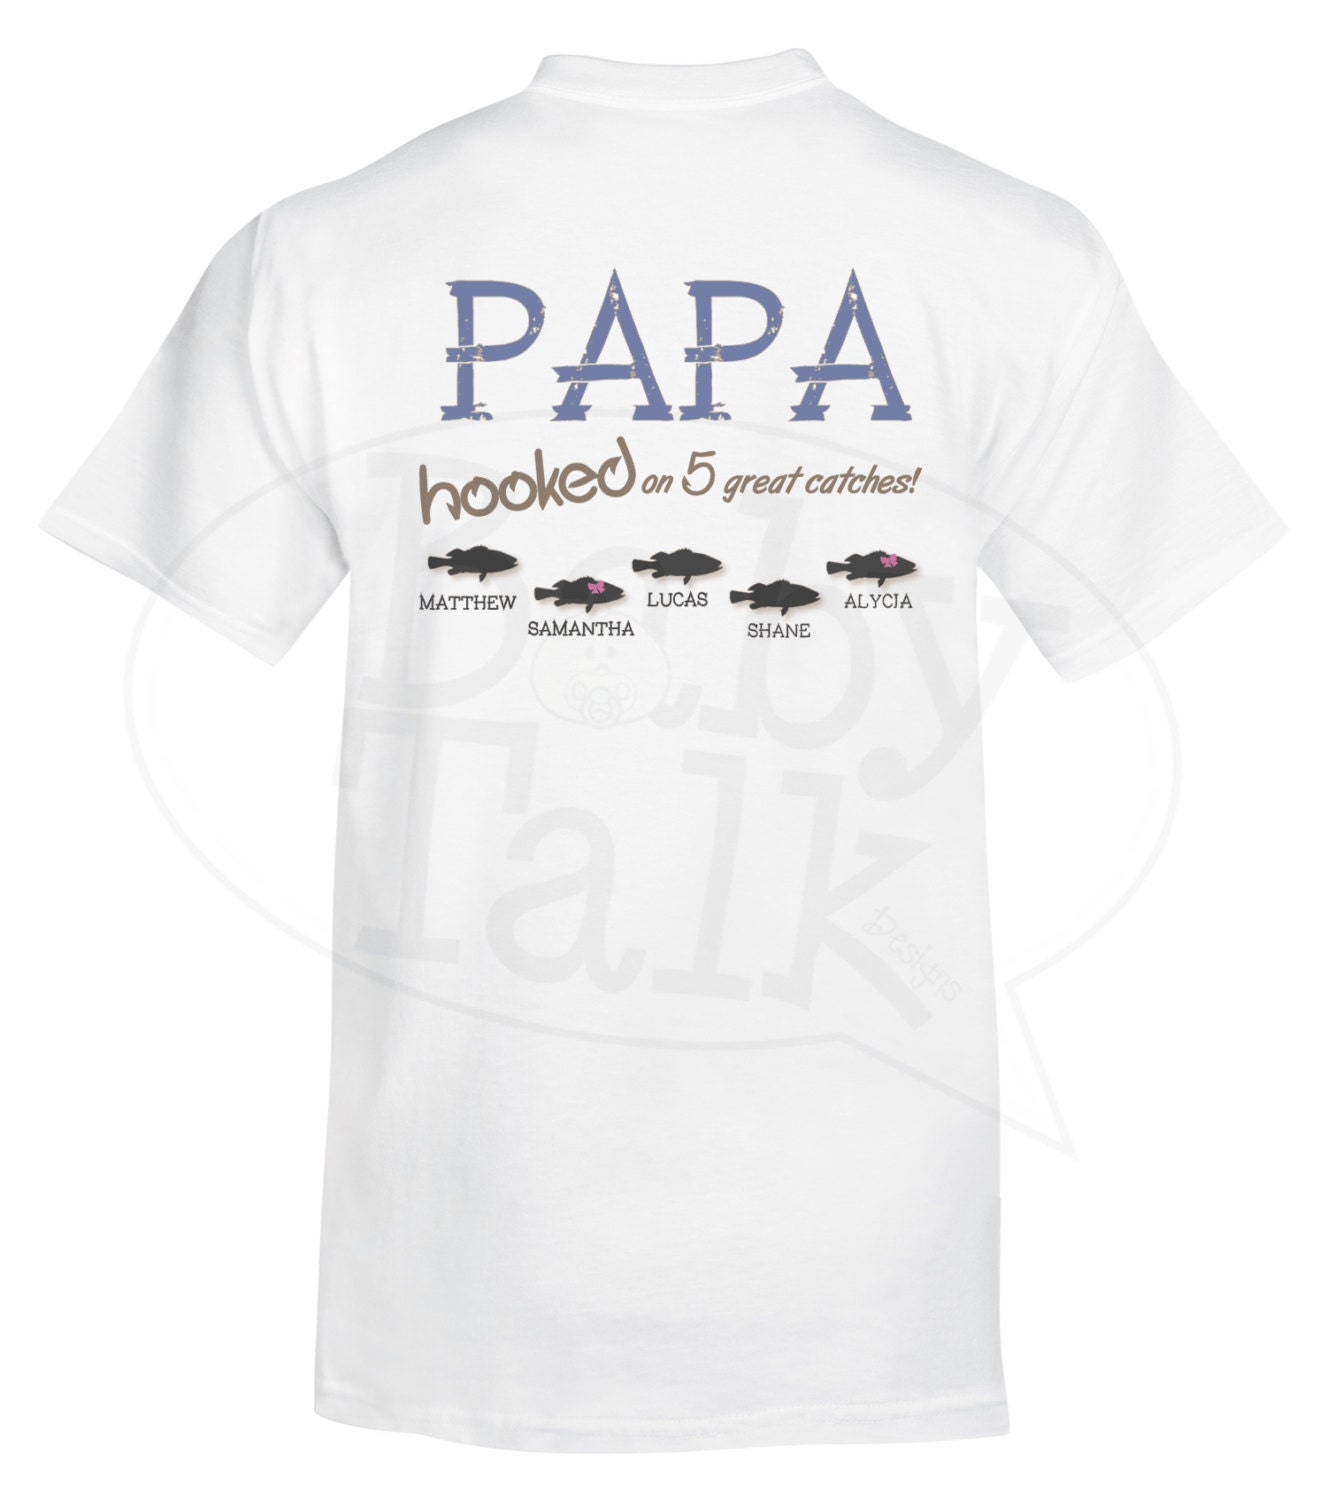 Download Dad or Grandpa PERSONALIZED fishing shirt hooked on great